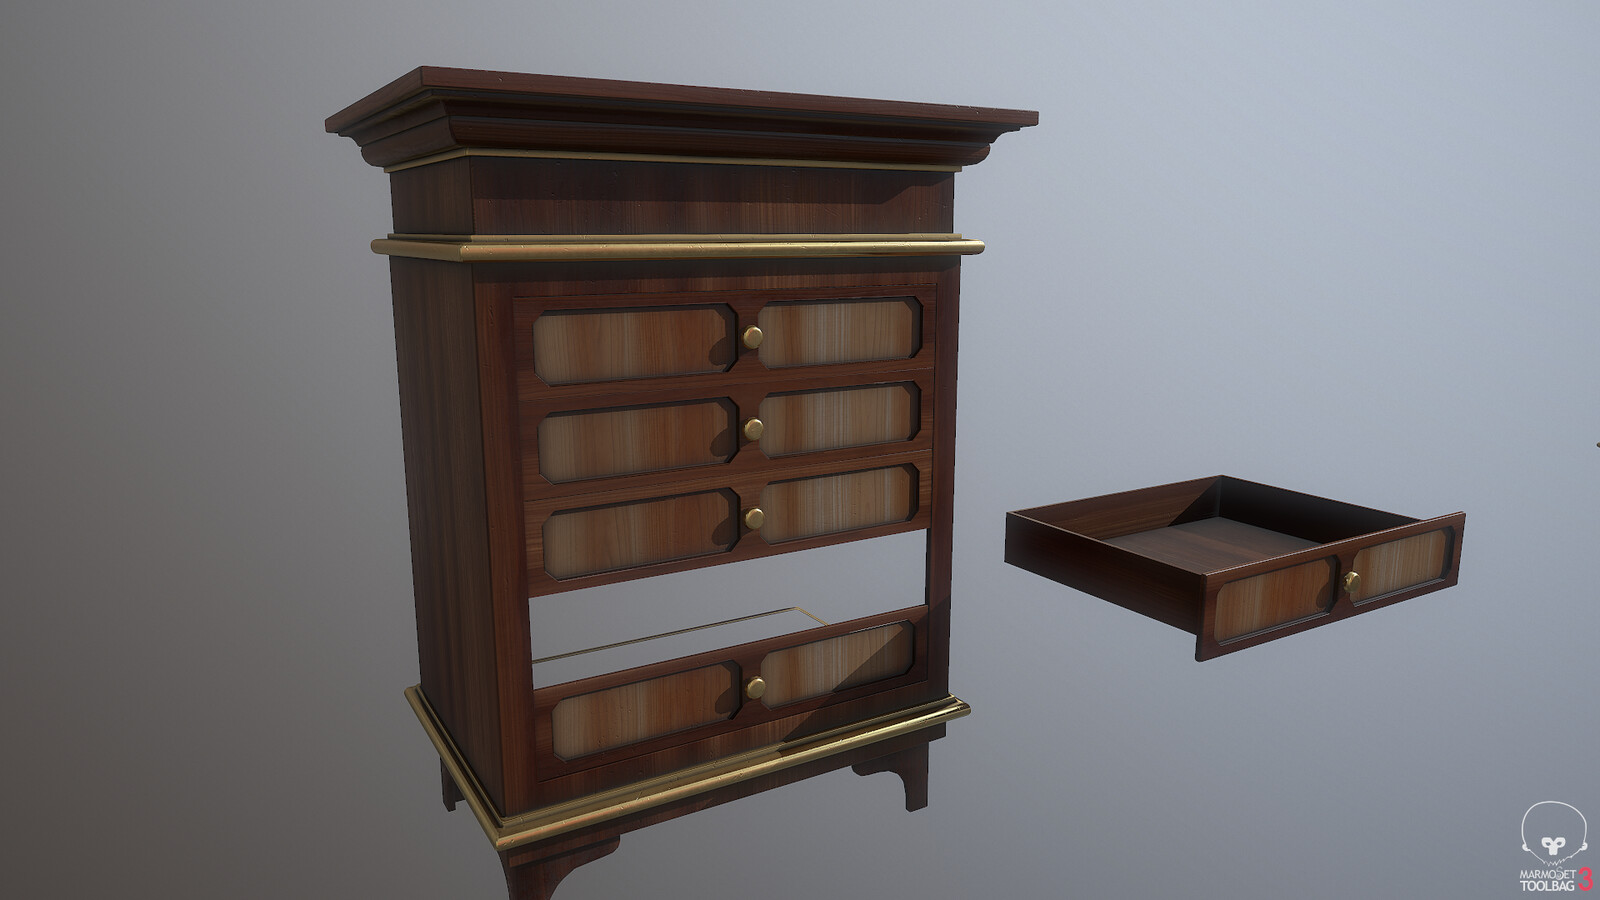 Dresser, modeled in Max, textured in Substance.